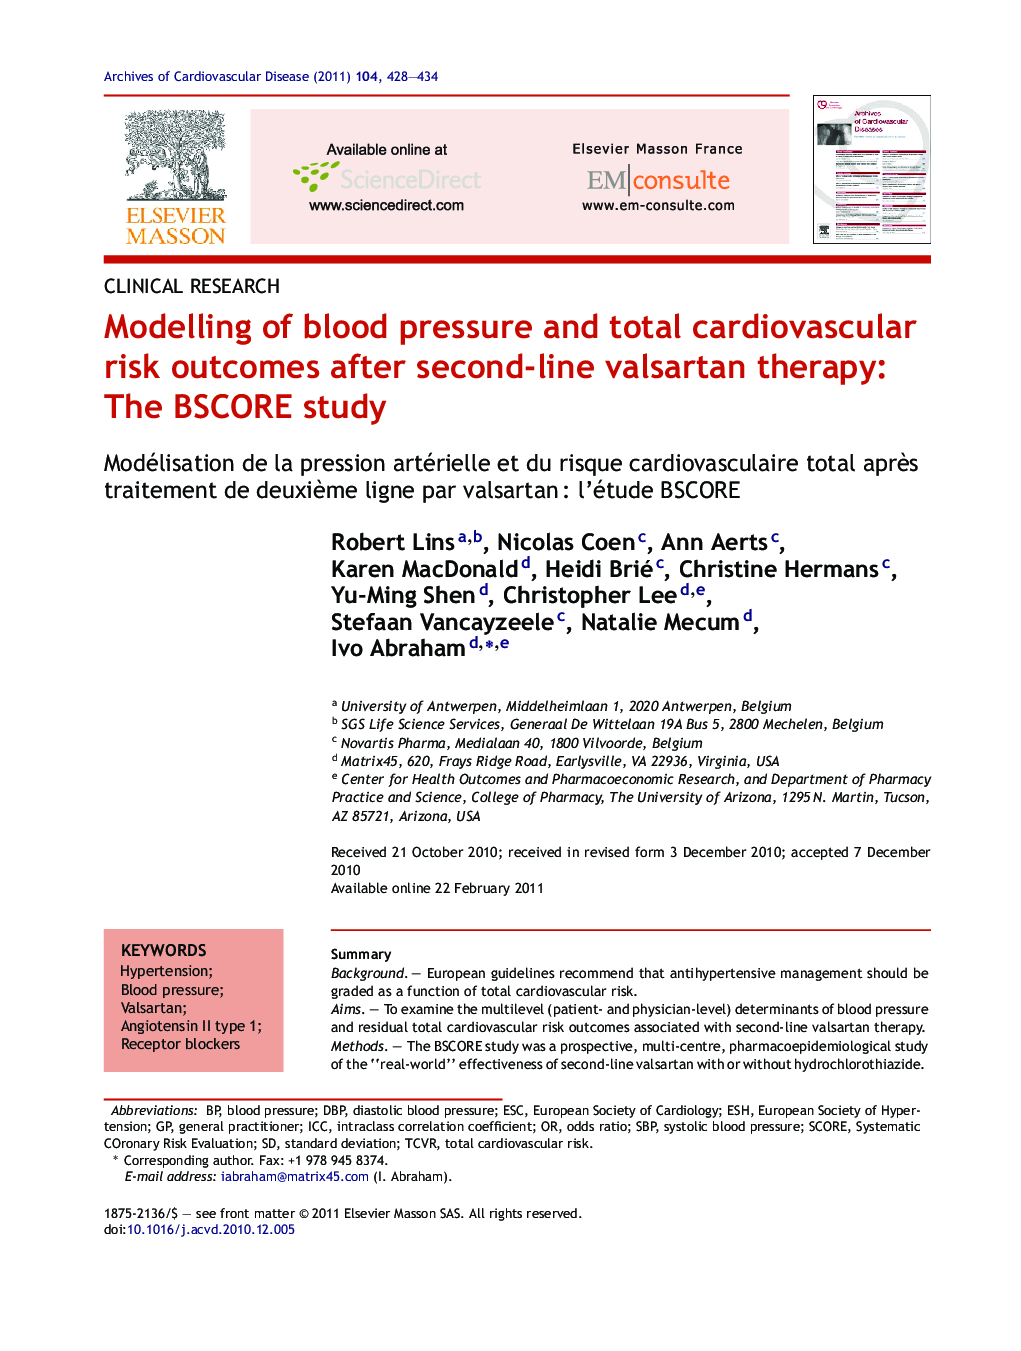 Modelling of blood pressure and total cardiovascular risk outcomes after second-line valsartan therapy: The BSCORE study